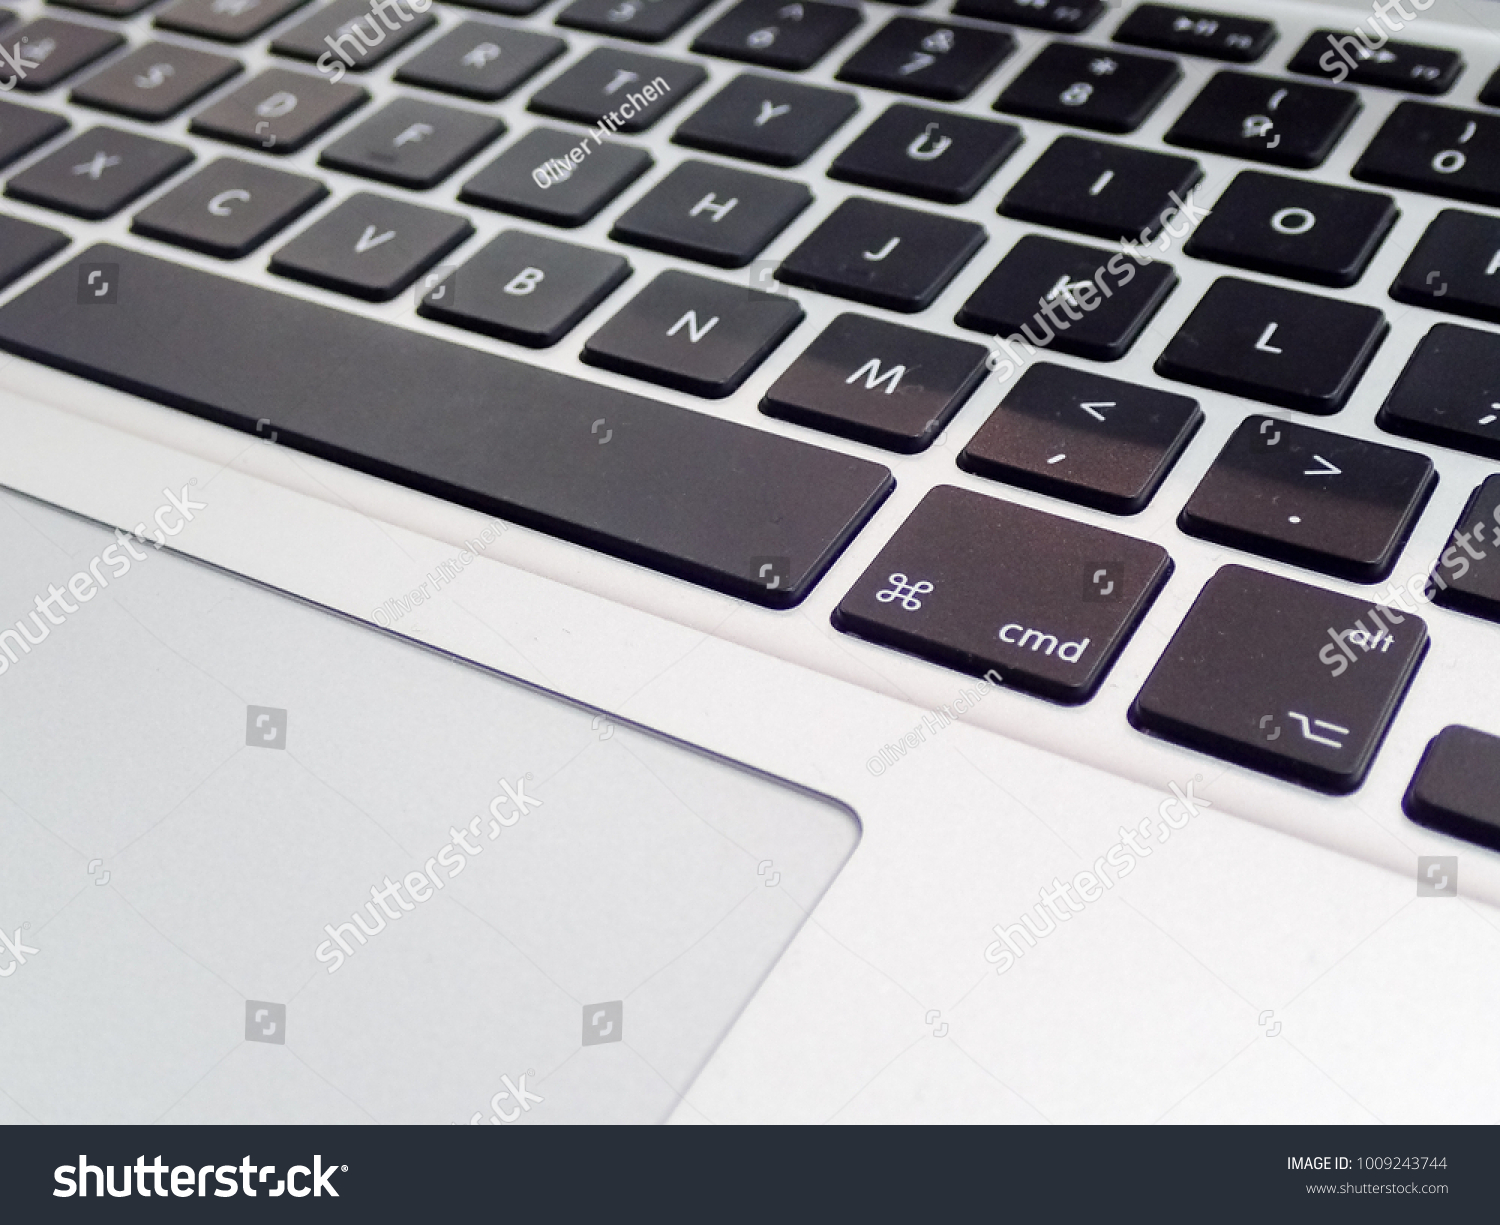 A modern, stylish computer keyboard, with the focus on the “cmd” and “alt” keys. The flat trackpad can be seen in the frame #1009243744